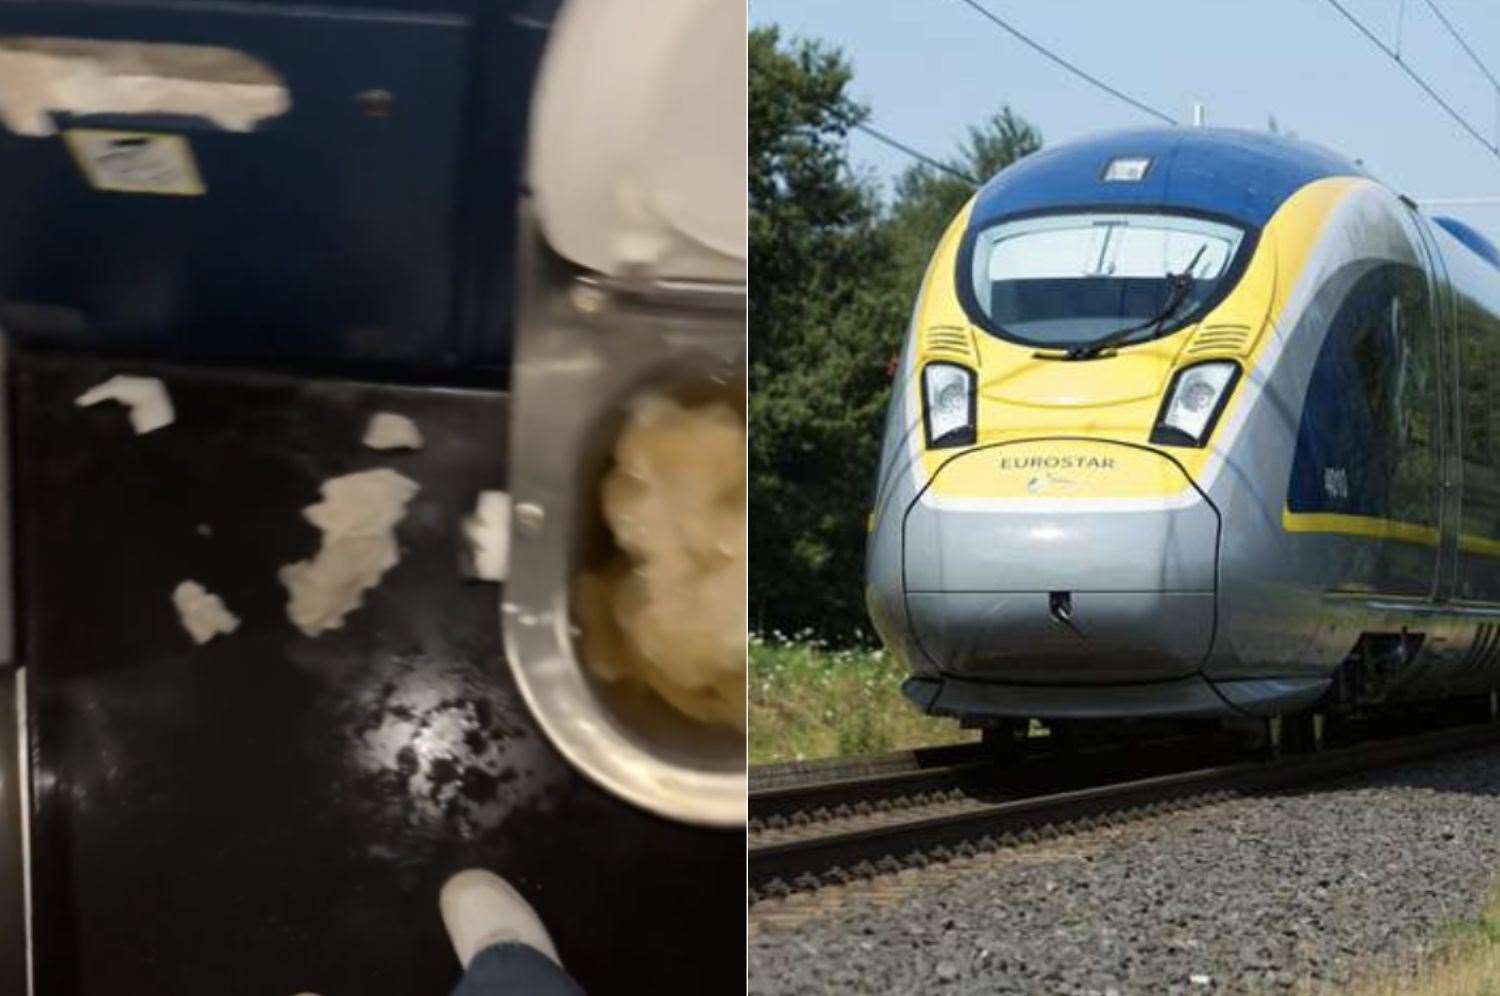 A Eurostar train was left stranded at Folkestone for more than seven hours